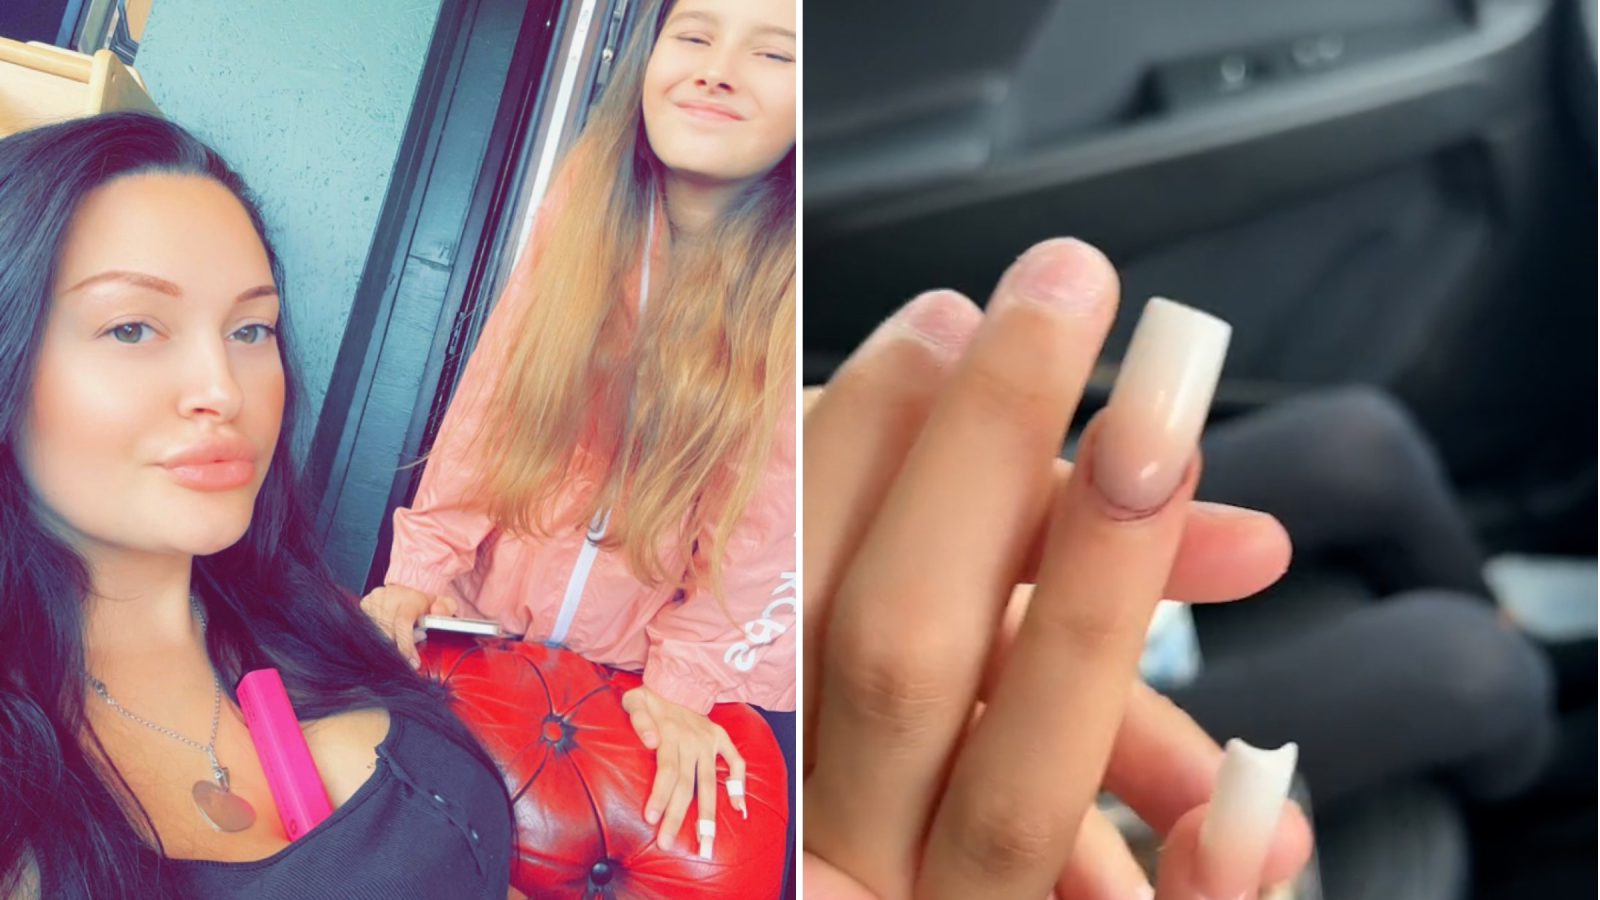 Mom Defends 10-Year-Old Daughter's Acrylic Nails Despite Painful